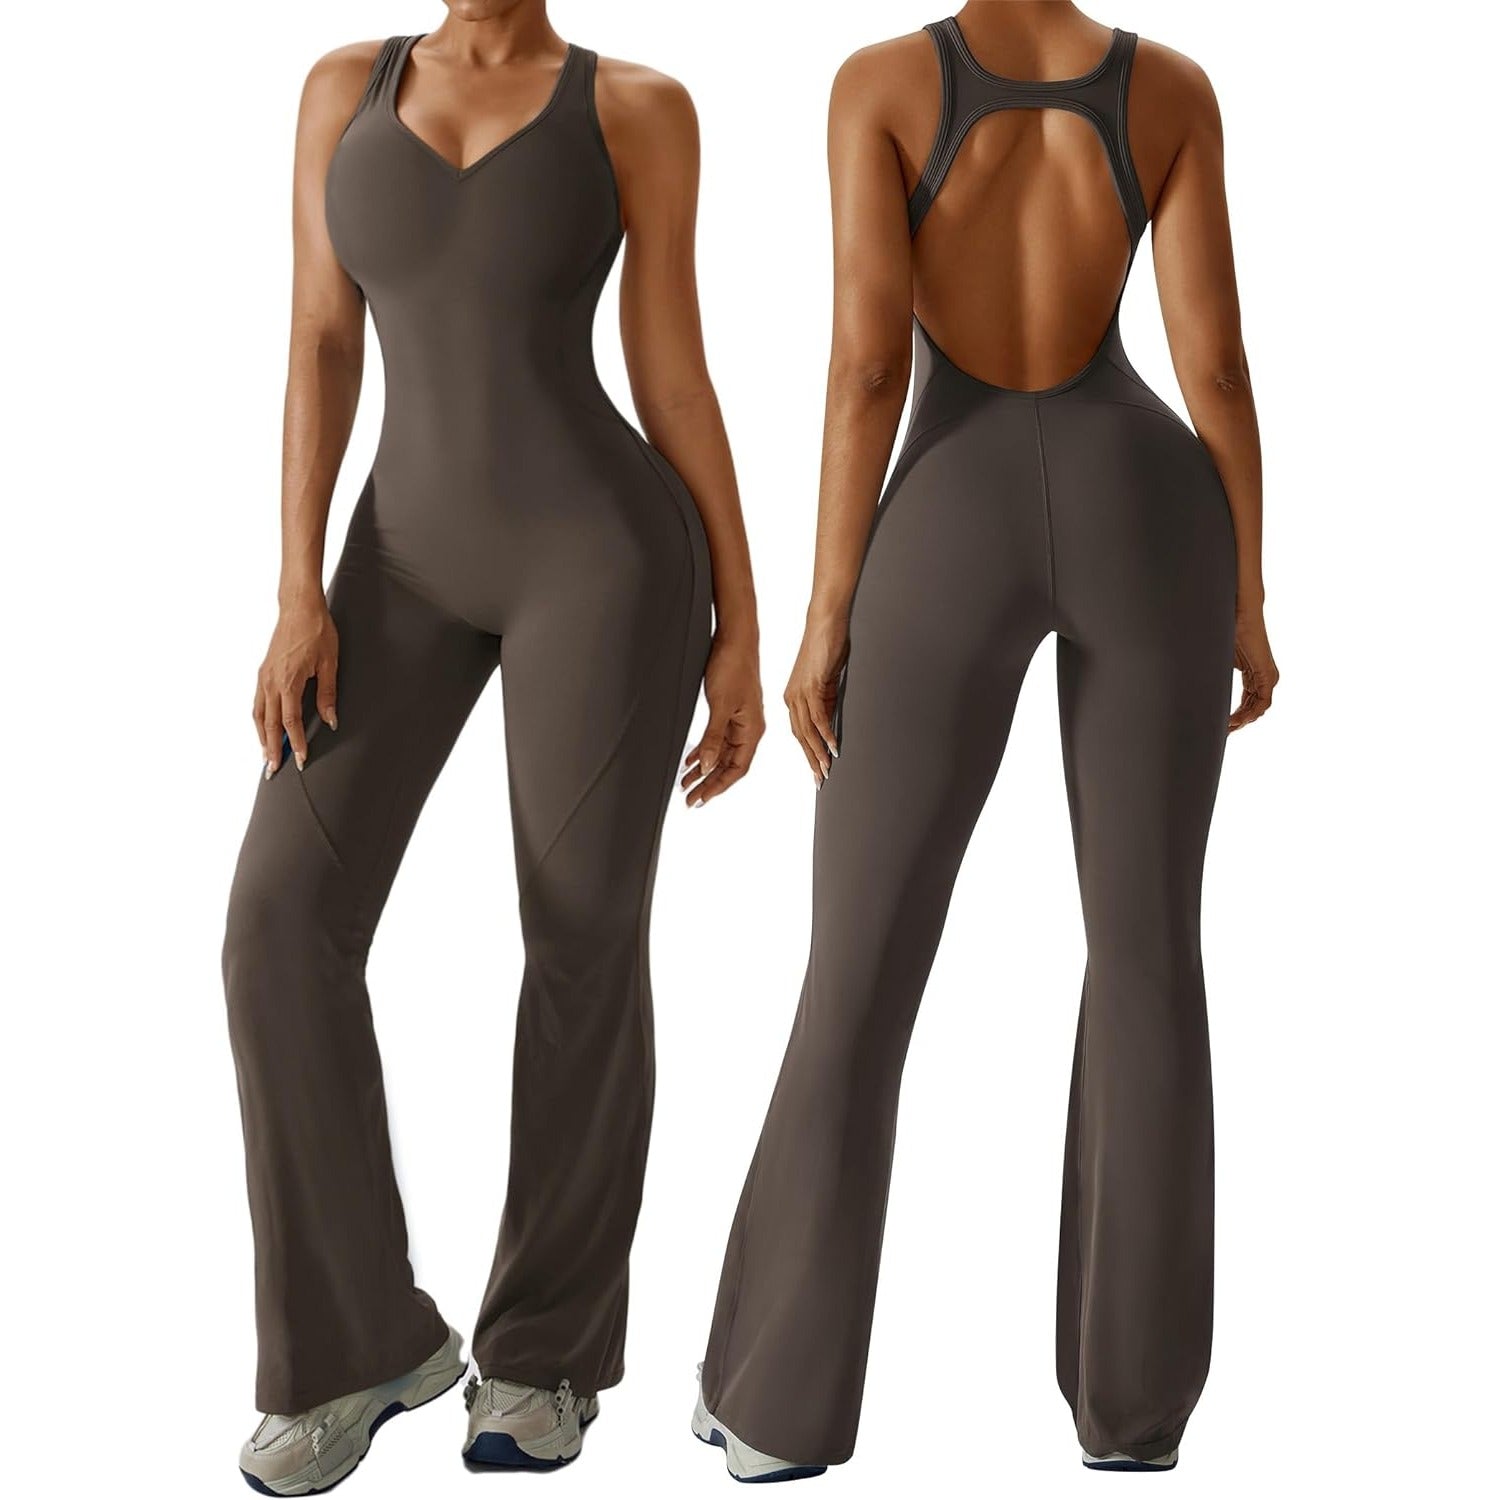 Womens Flare Jumpsuit with Bra Tummy Control Cutout Romper Workout Outfit Sleeveless Unitard One Piece Backless Bodysuit